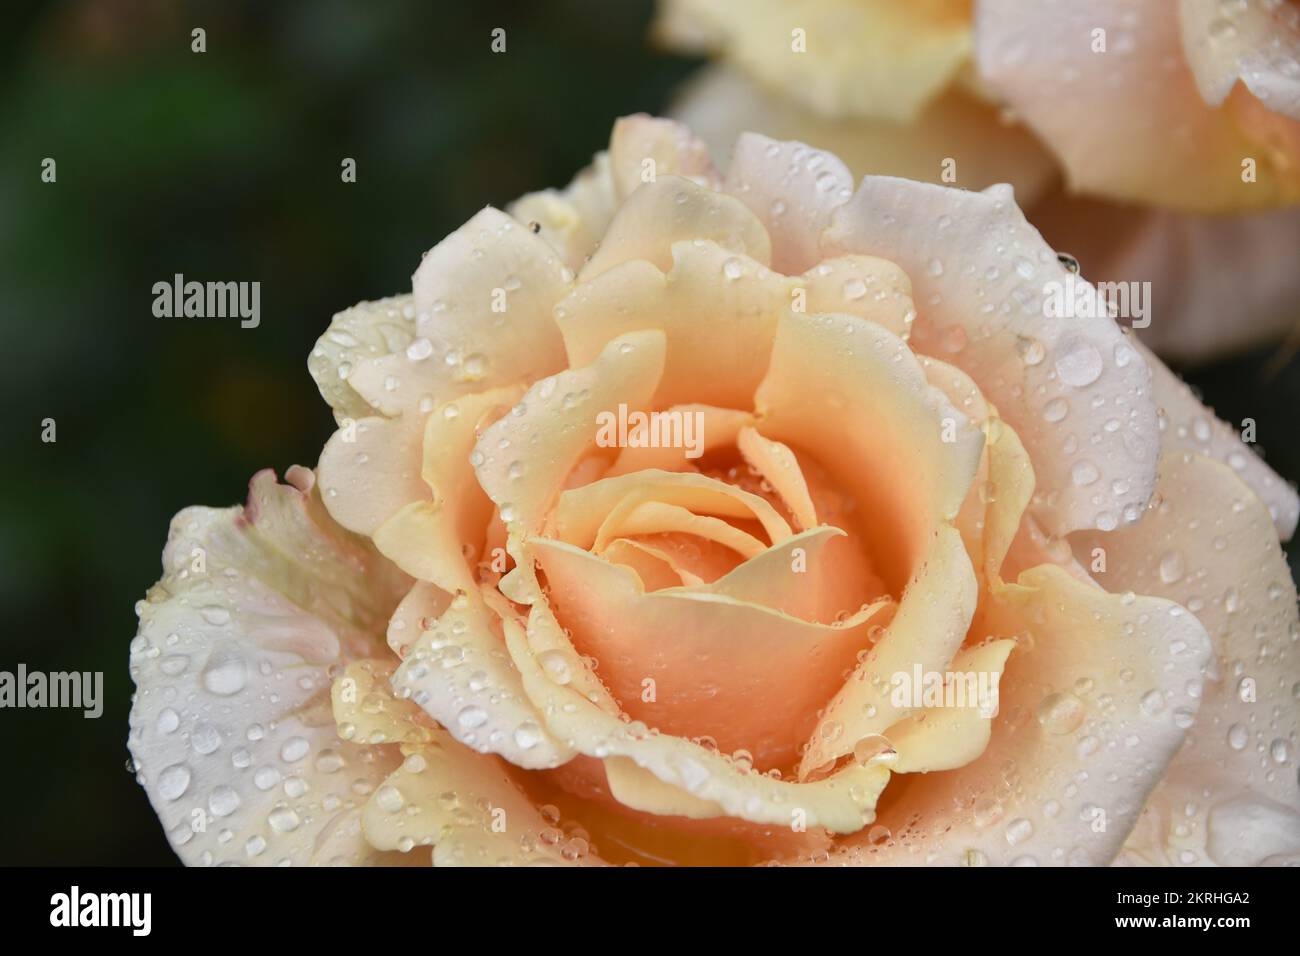 Rose flower in full blossom. It is close up view and the background is defocused. Stock Photo